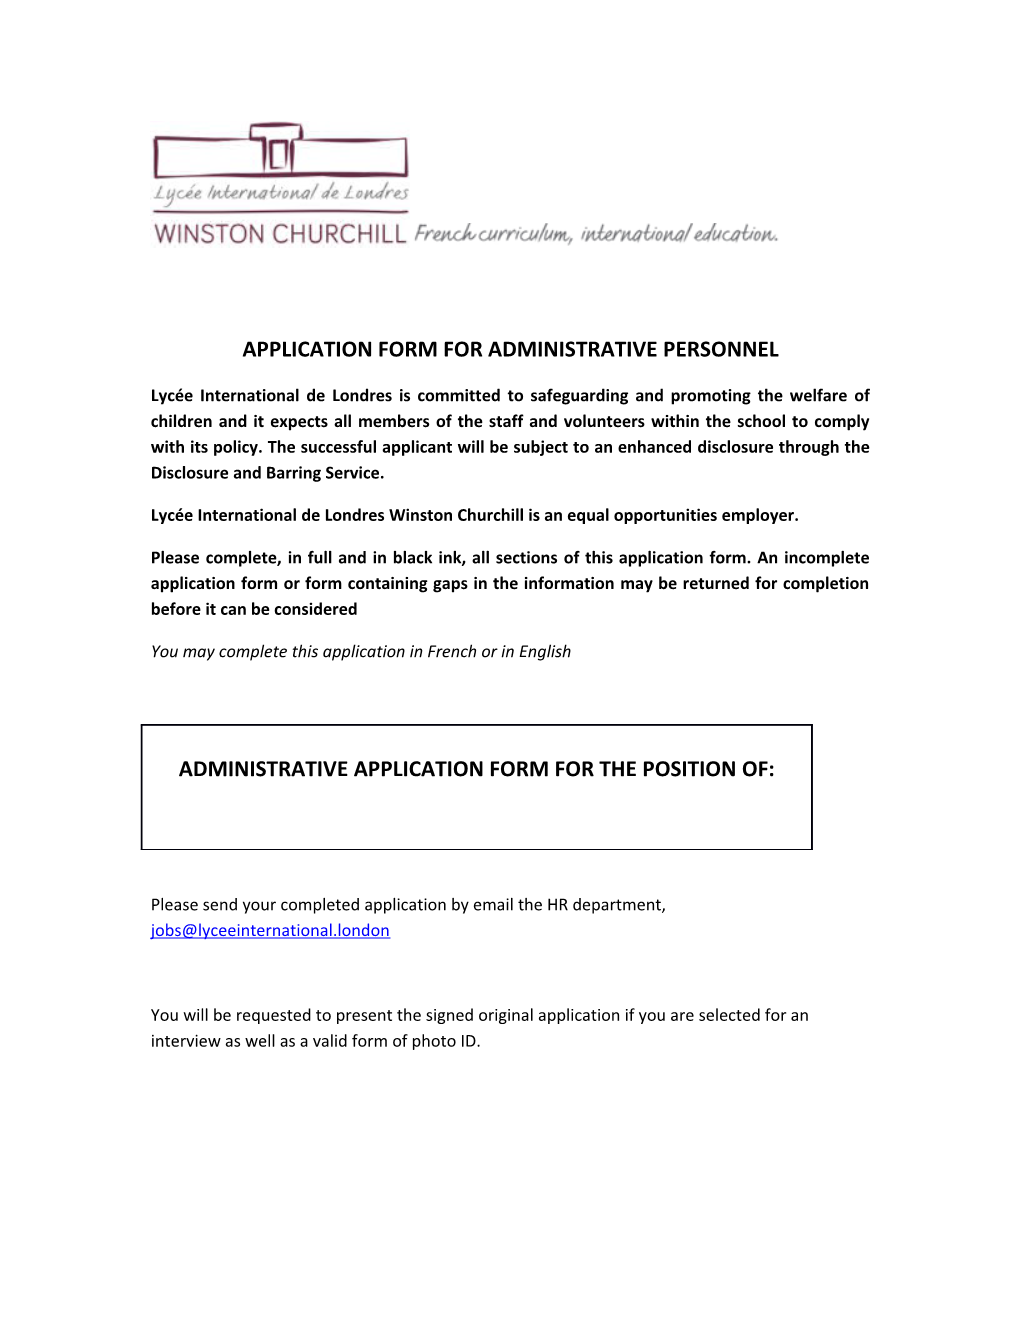 Application Form for Administrative Personnel